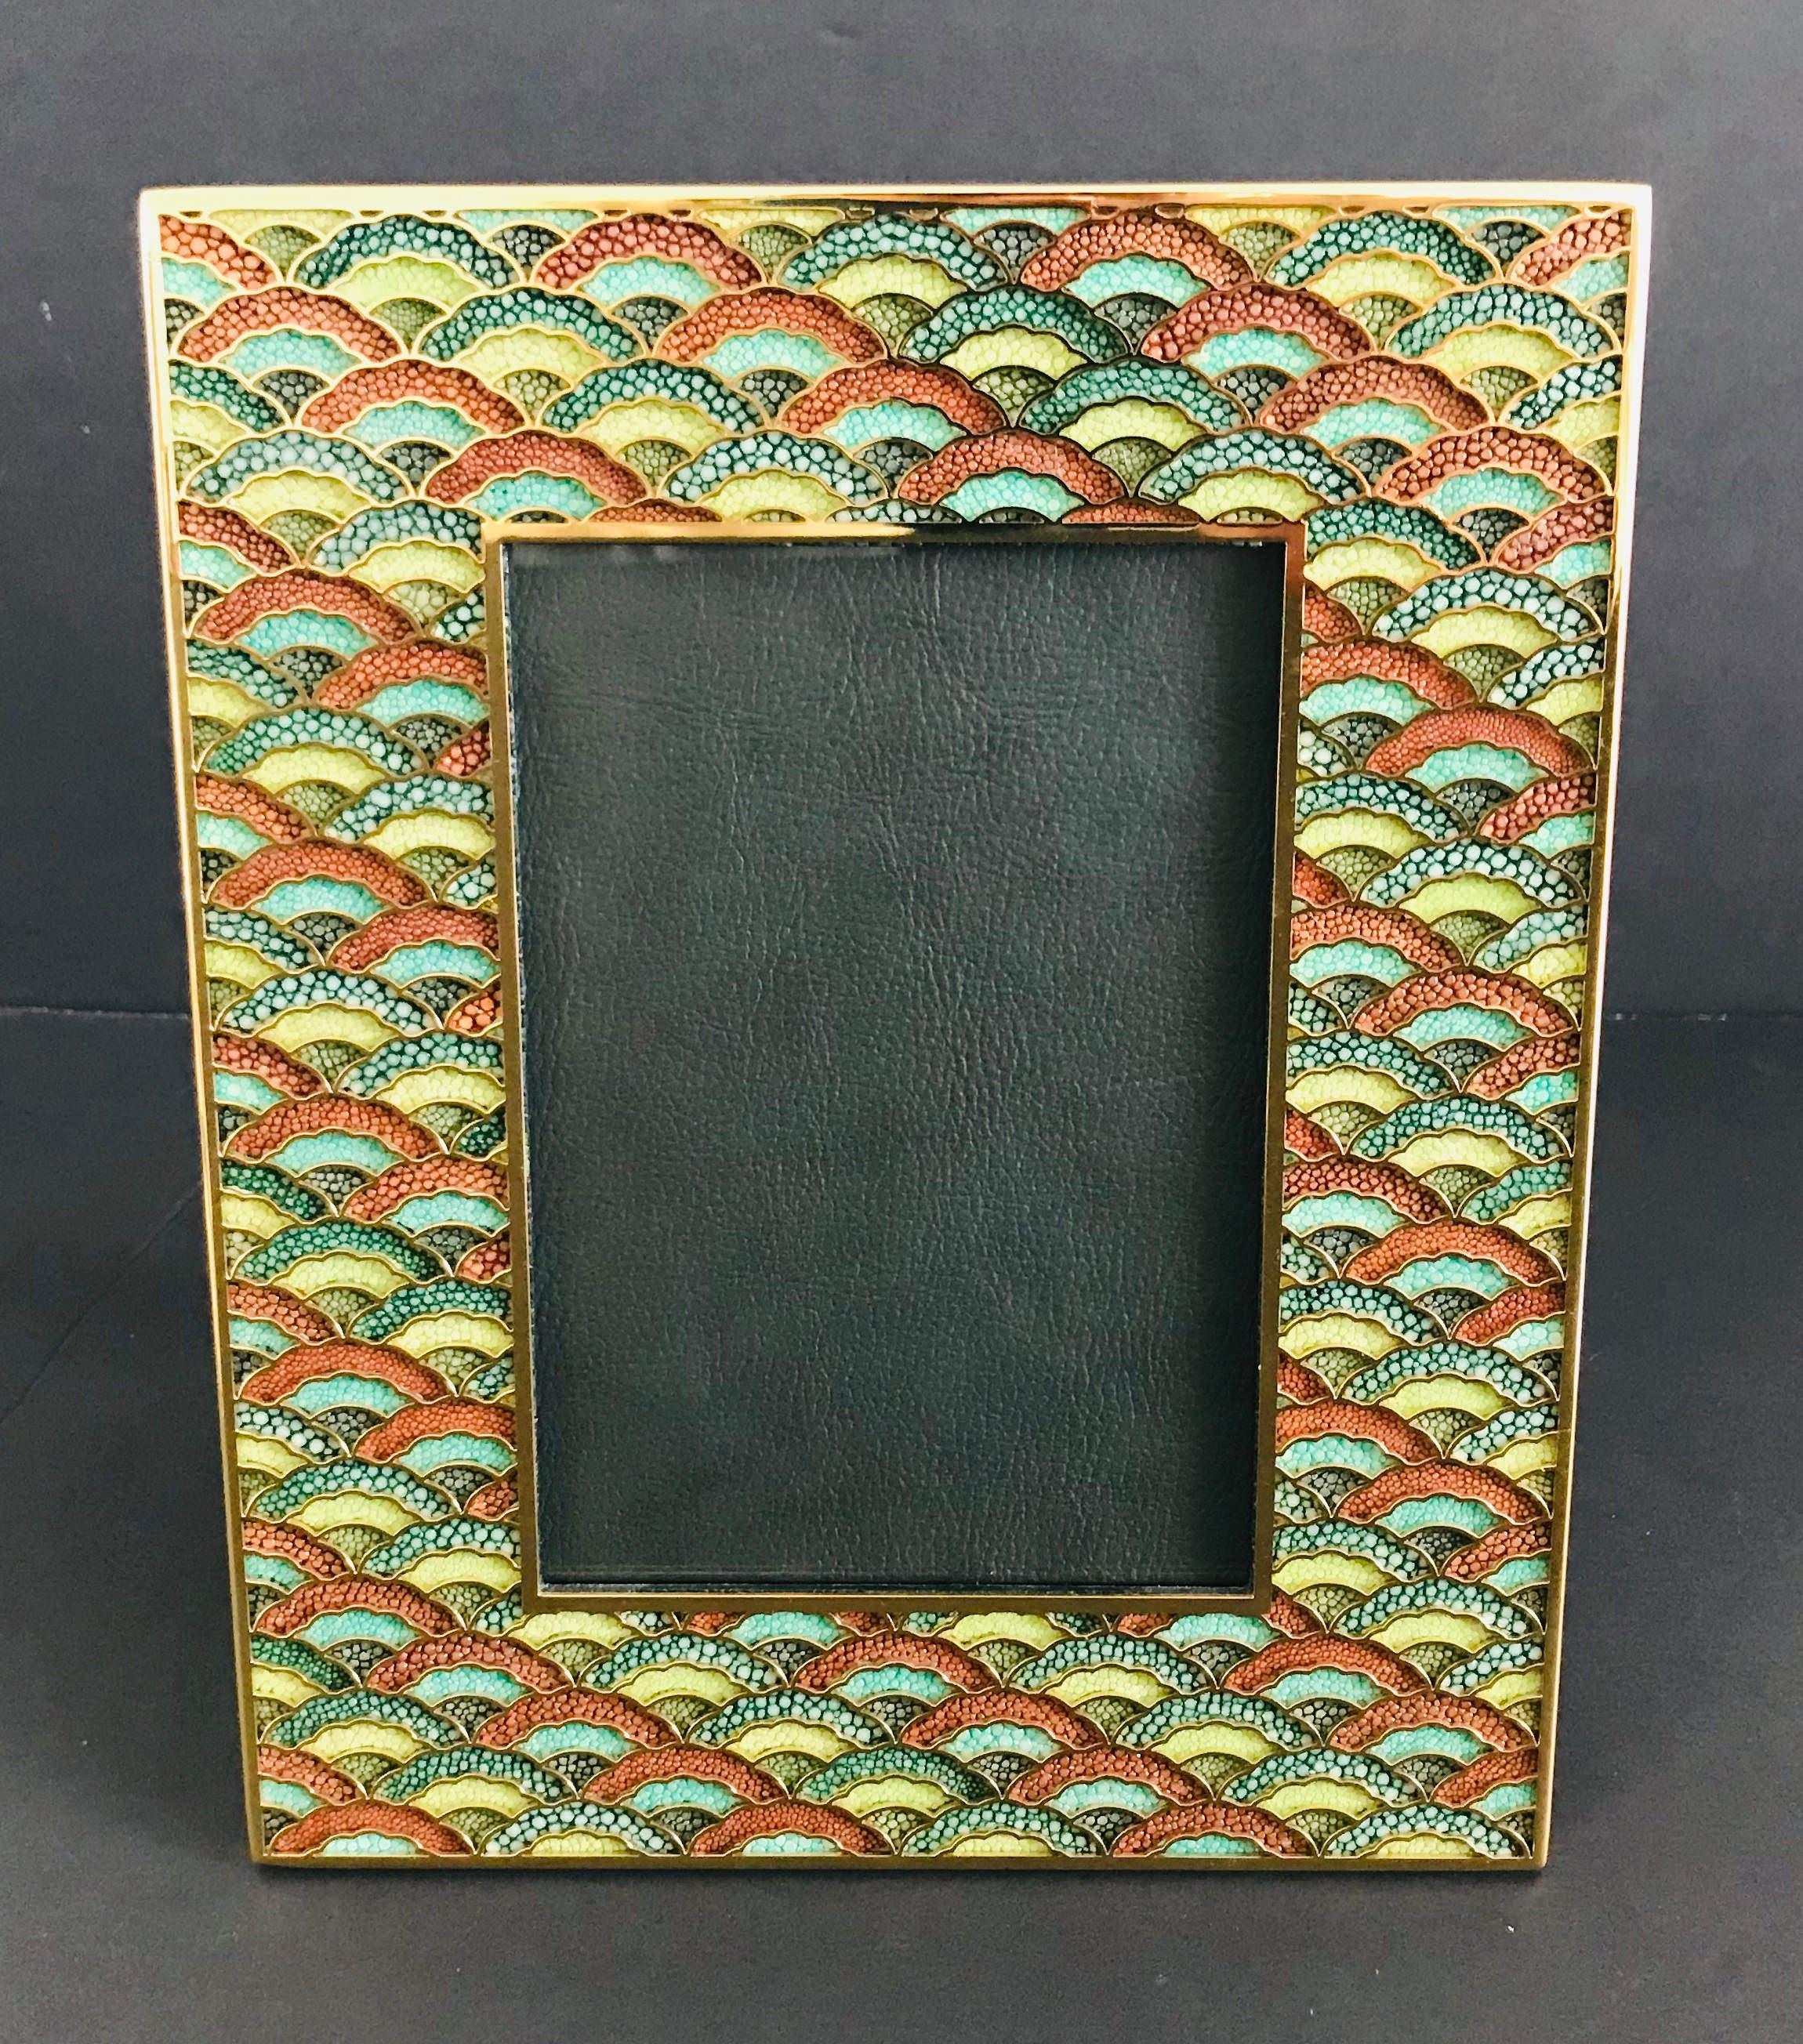 Multi-color shagreen leather and 24 karat gold-plated photo frame by Fabio Ltd
Height: 10.5 inches / Width: 8.5 inches / Depth: 1 inch
Photo size: 5 inches by 7 inches
LAST 1 in stock in Palm Springs ON 50% OFF SALE for $625 !!!
Order Reference #: